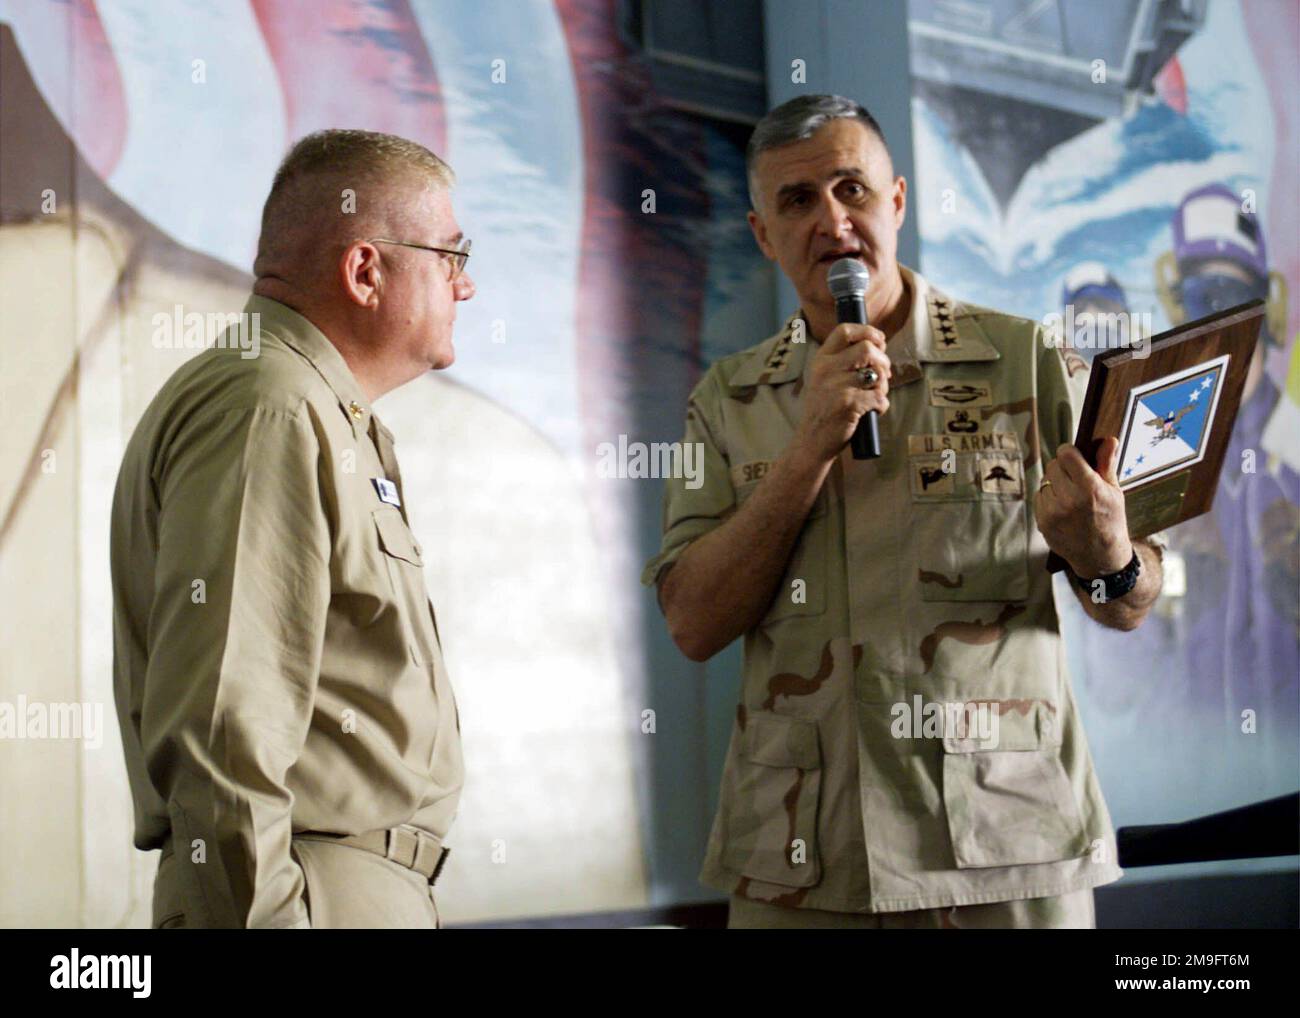 US Army General Henry Shelton, Chairman Joint Chiefs of STAFF, presents a Joint Chiefs of STAFF plaque dedicated to the crew of USS HARRY S. TRUMAN (CVN 75) to US Navy Boiler Technican MASTER CHIEF (Surface Warfare/Air Warfare) Mike Driscoll, Command MASTER CHIEF, while addressing the Sailors and Marines in the ship's hangar bay. Truman is on station in the Persian Gulf in support of Operation SOUTHERN WATCH. Subject Operation/Series: SOUTHERN WATCH Base: USS Harry S. Truman (CVN 75) Stock Photo